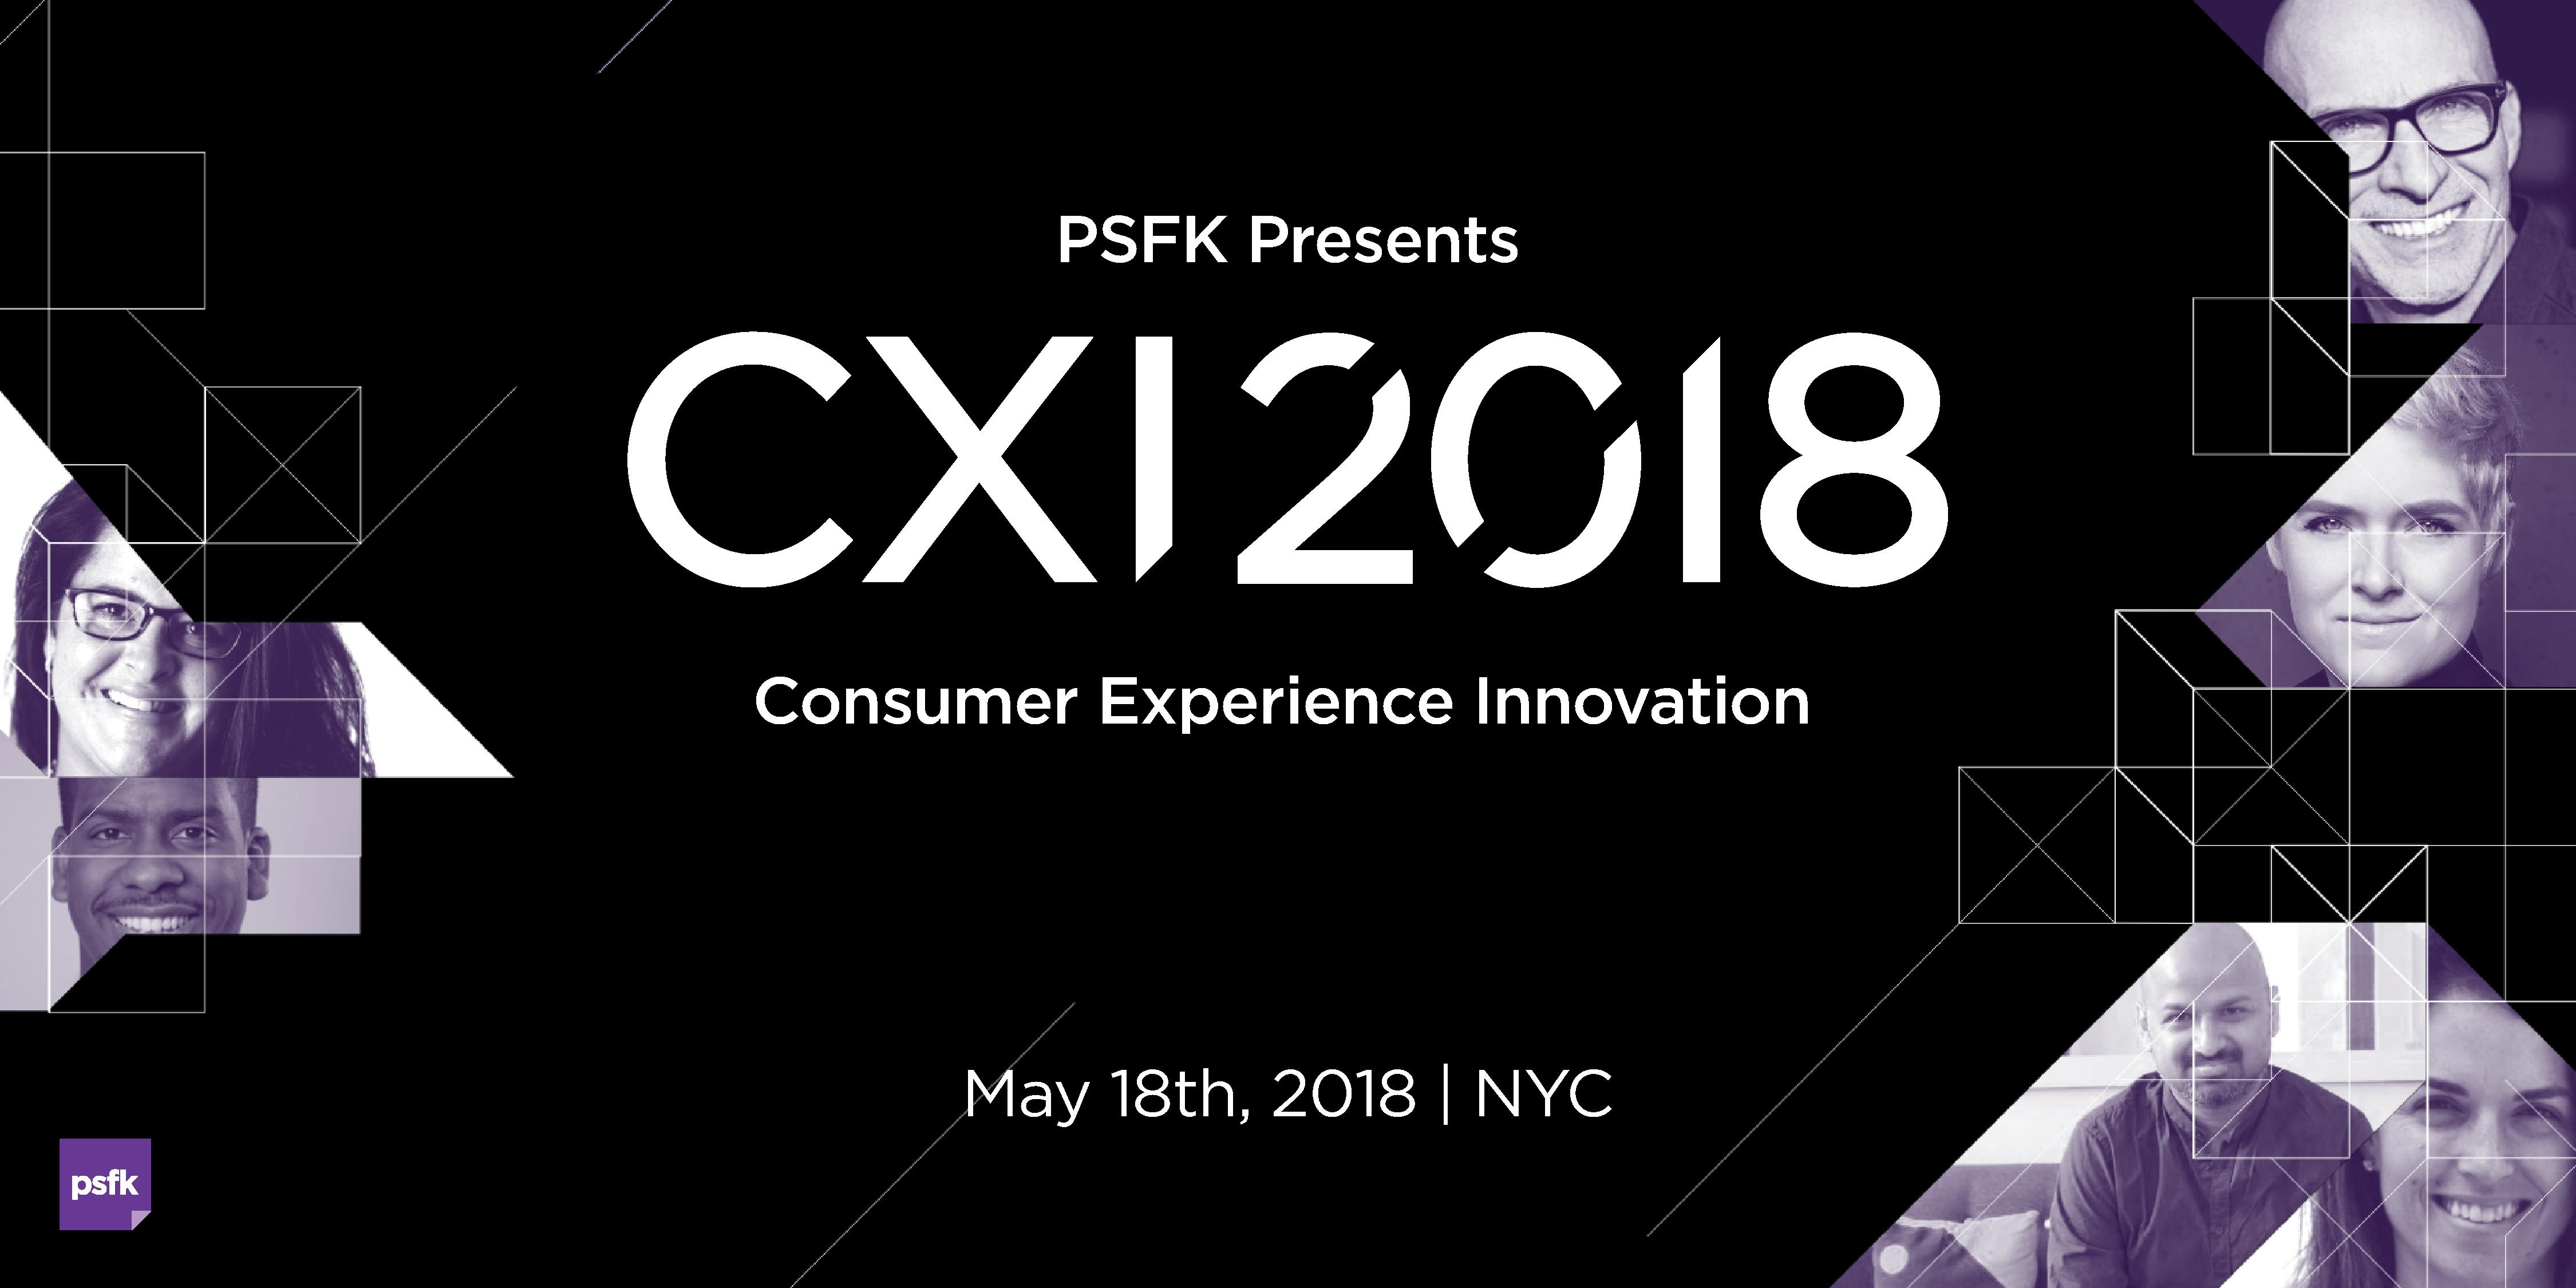 PSFK's CXI 2018 conference